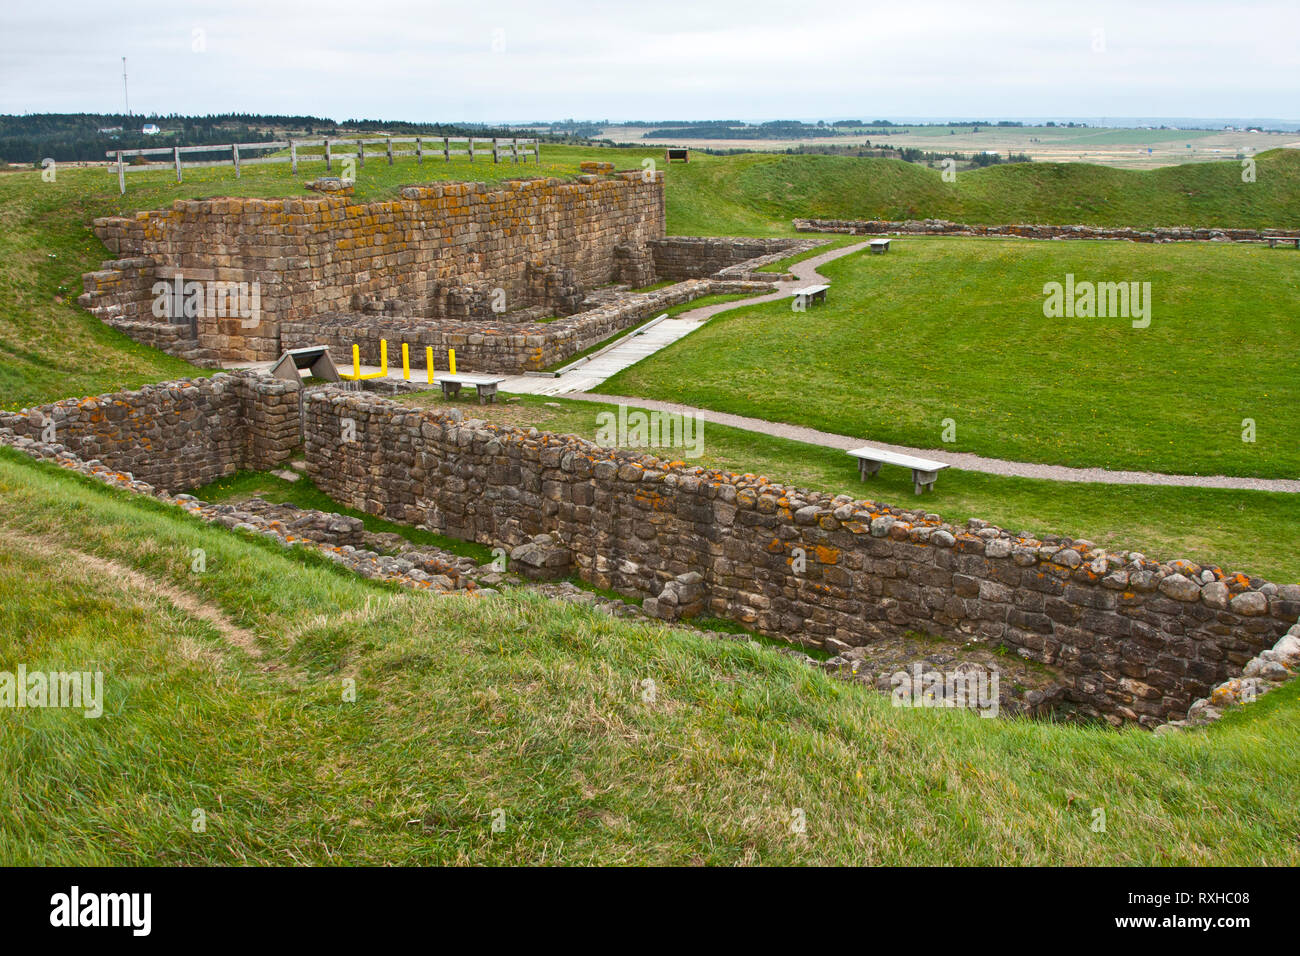 Canada, New Brunswick, Fort Beausejour, Fort Cumberland, French, British, 1755, French and Indian War, Seven Years War, Stock Photo